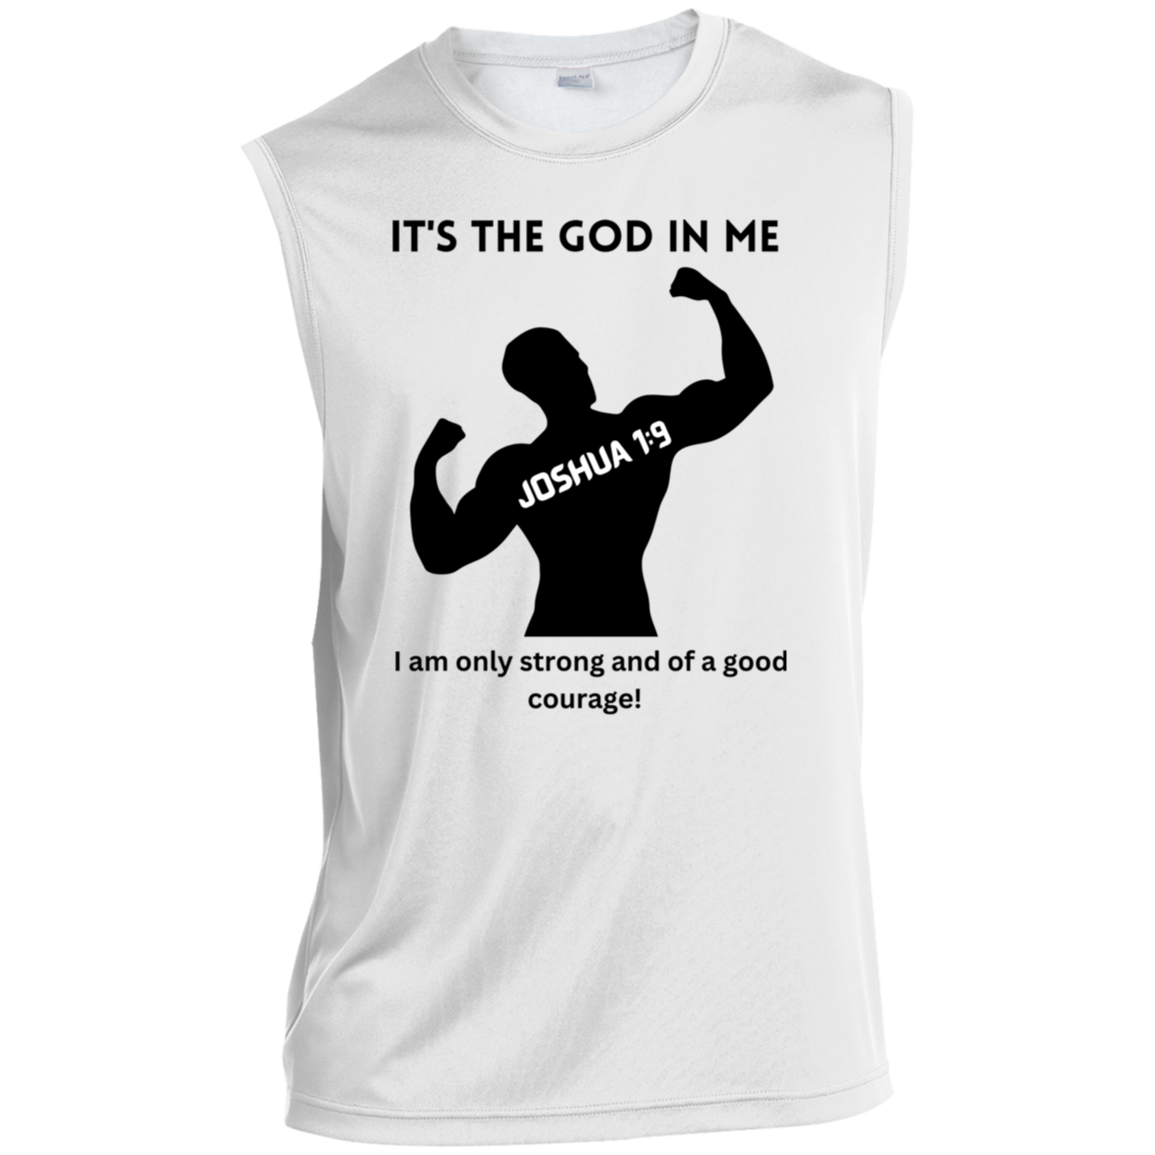 It's the God in me Men’s Sleeveless Performance Bible - Tees